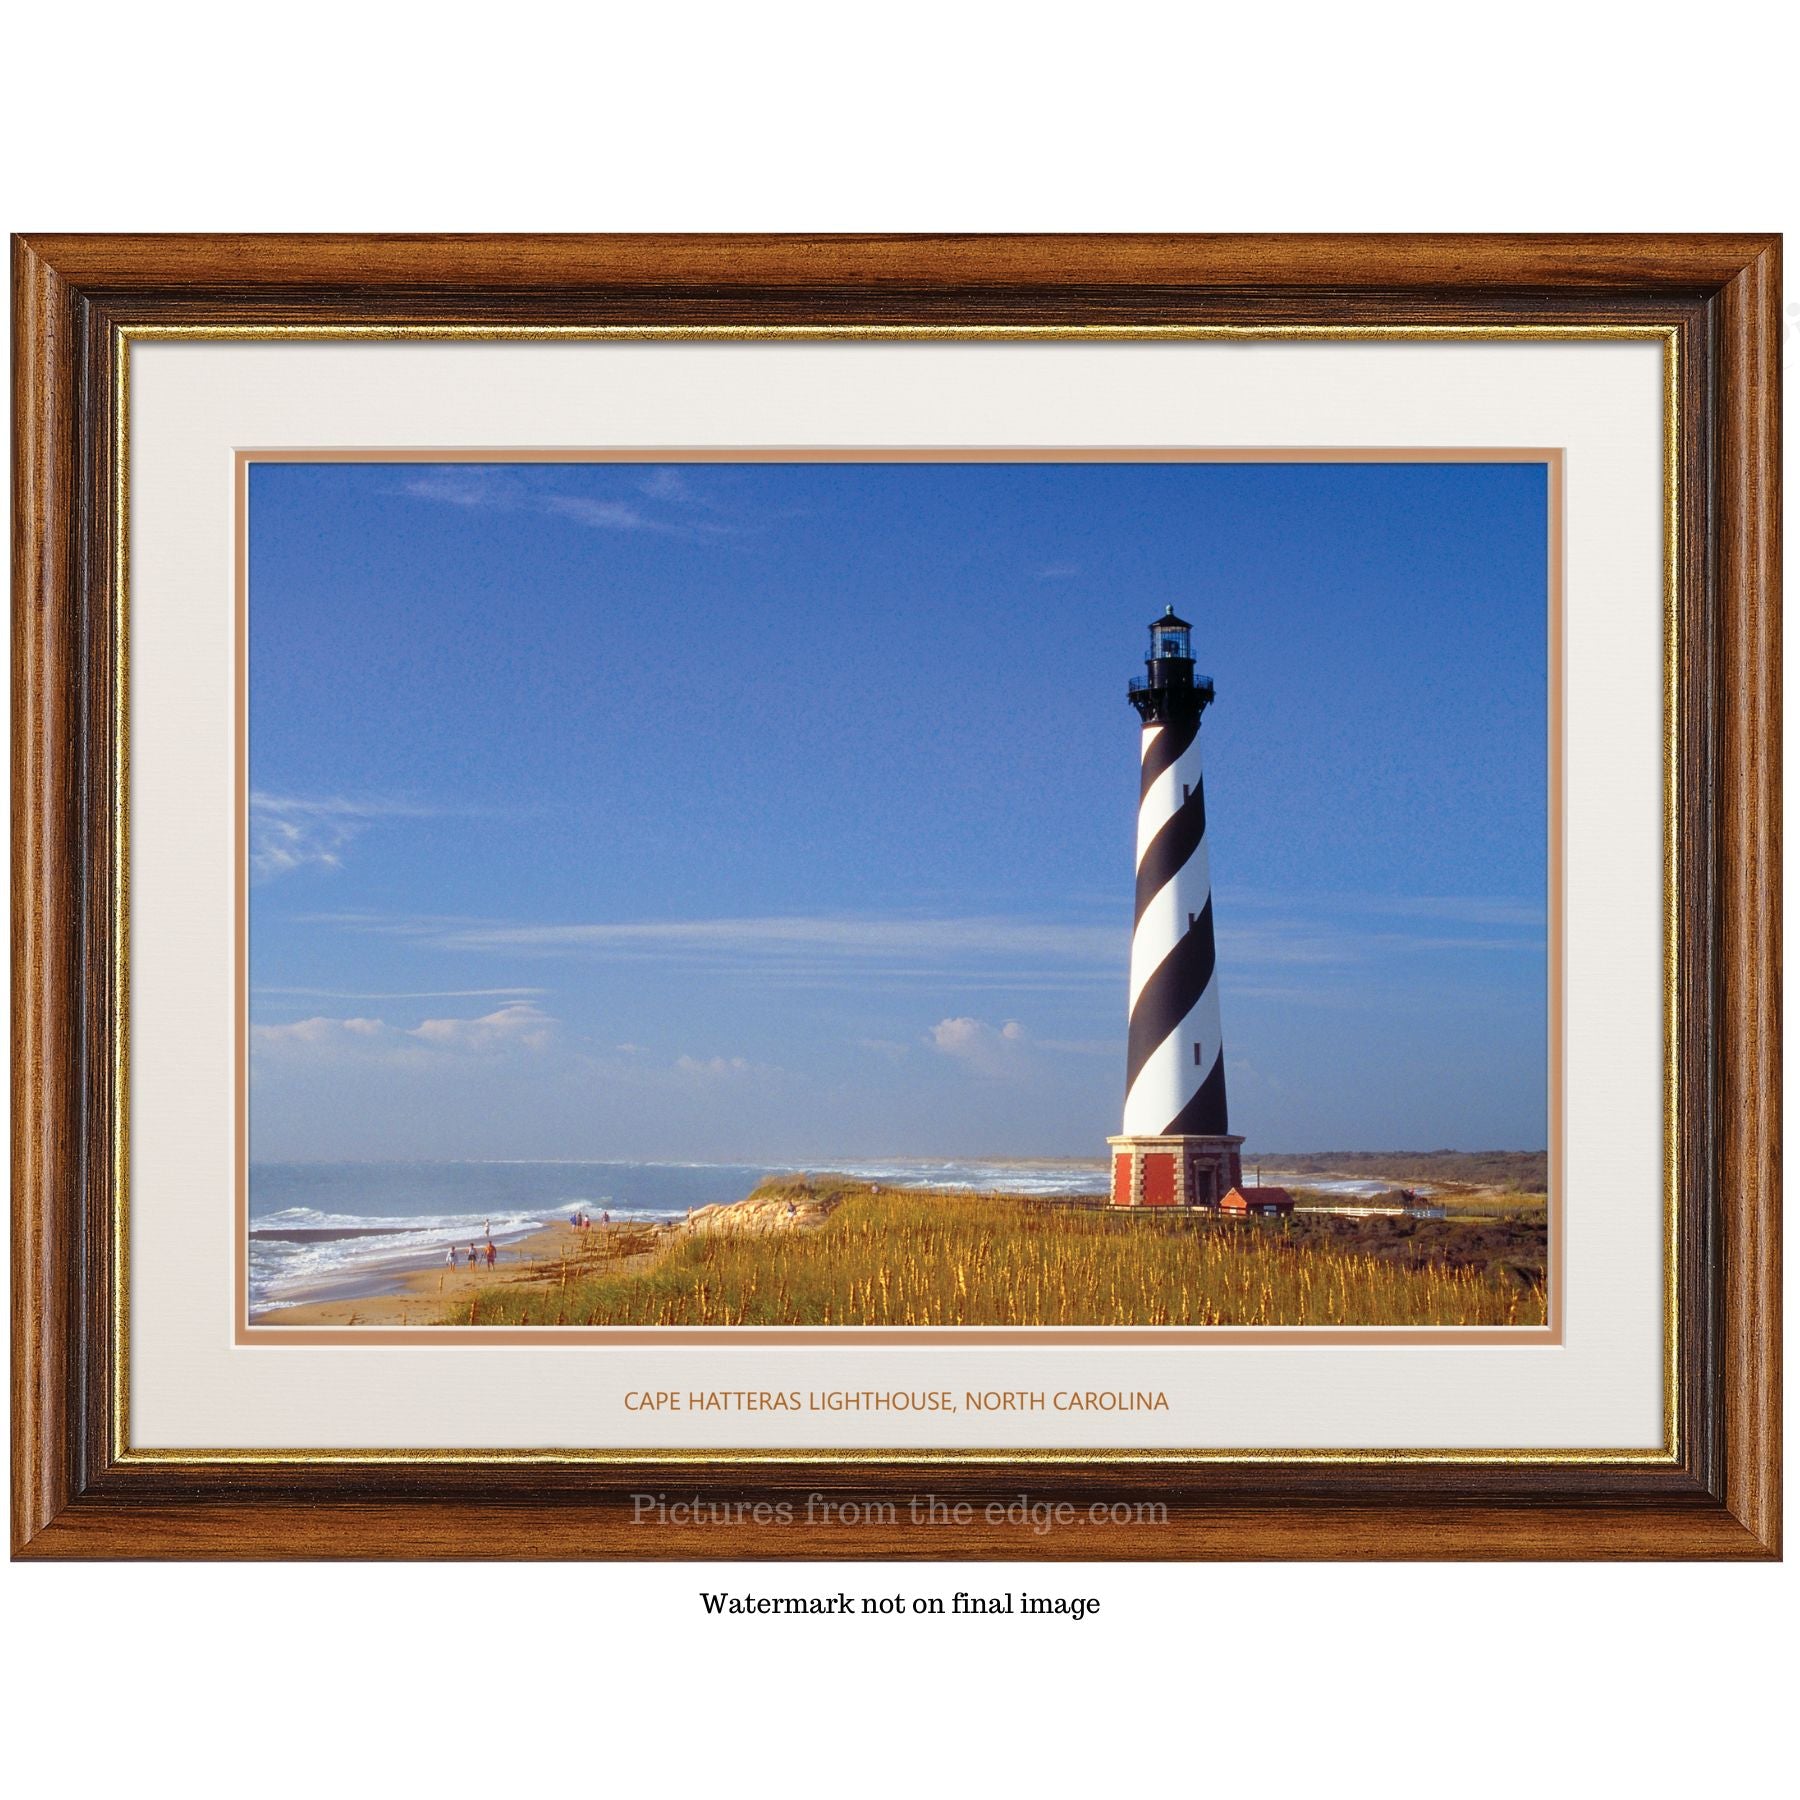 BeMoved by Cape Hatteras. Moveable and removeable!